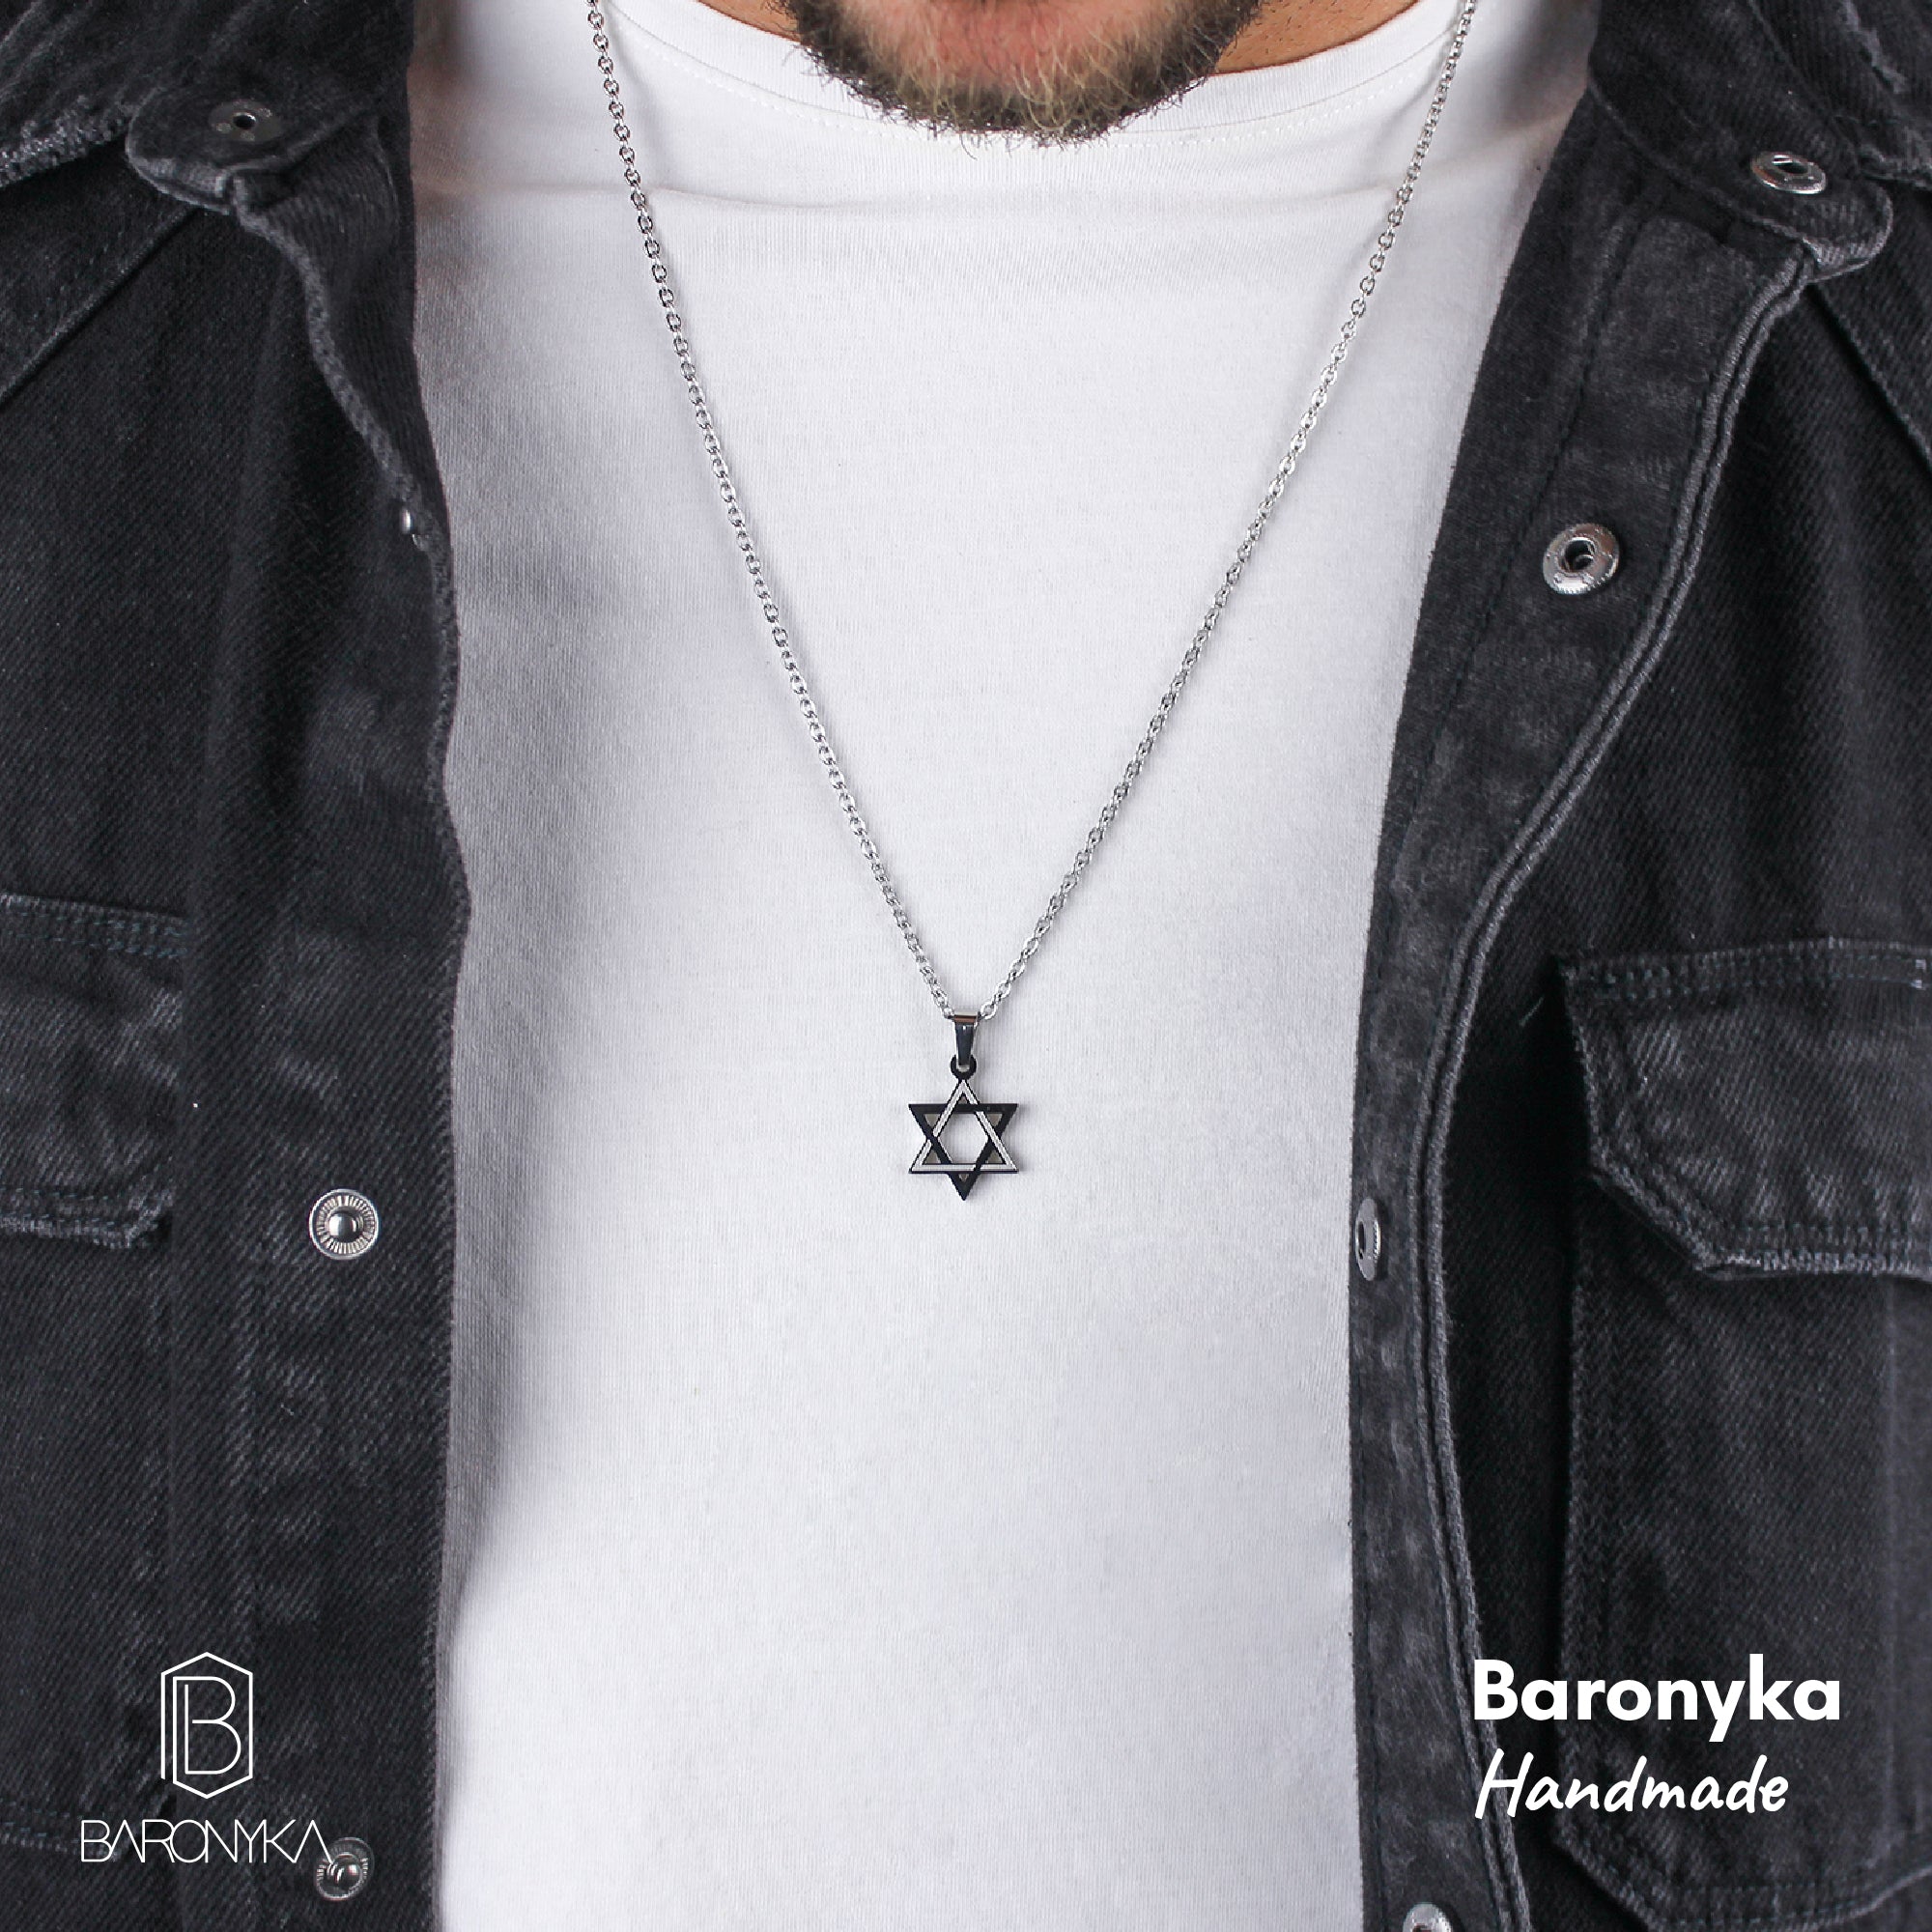 Star Of David Necklace (Silver-Plated)